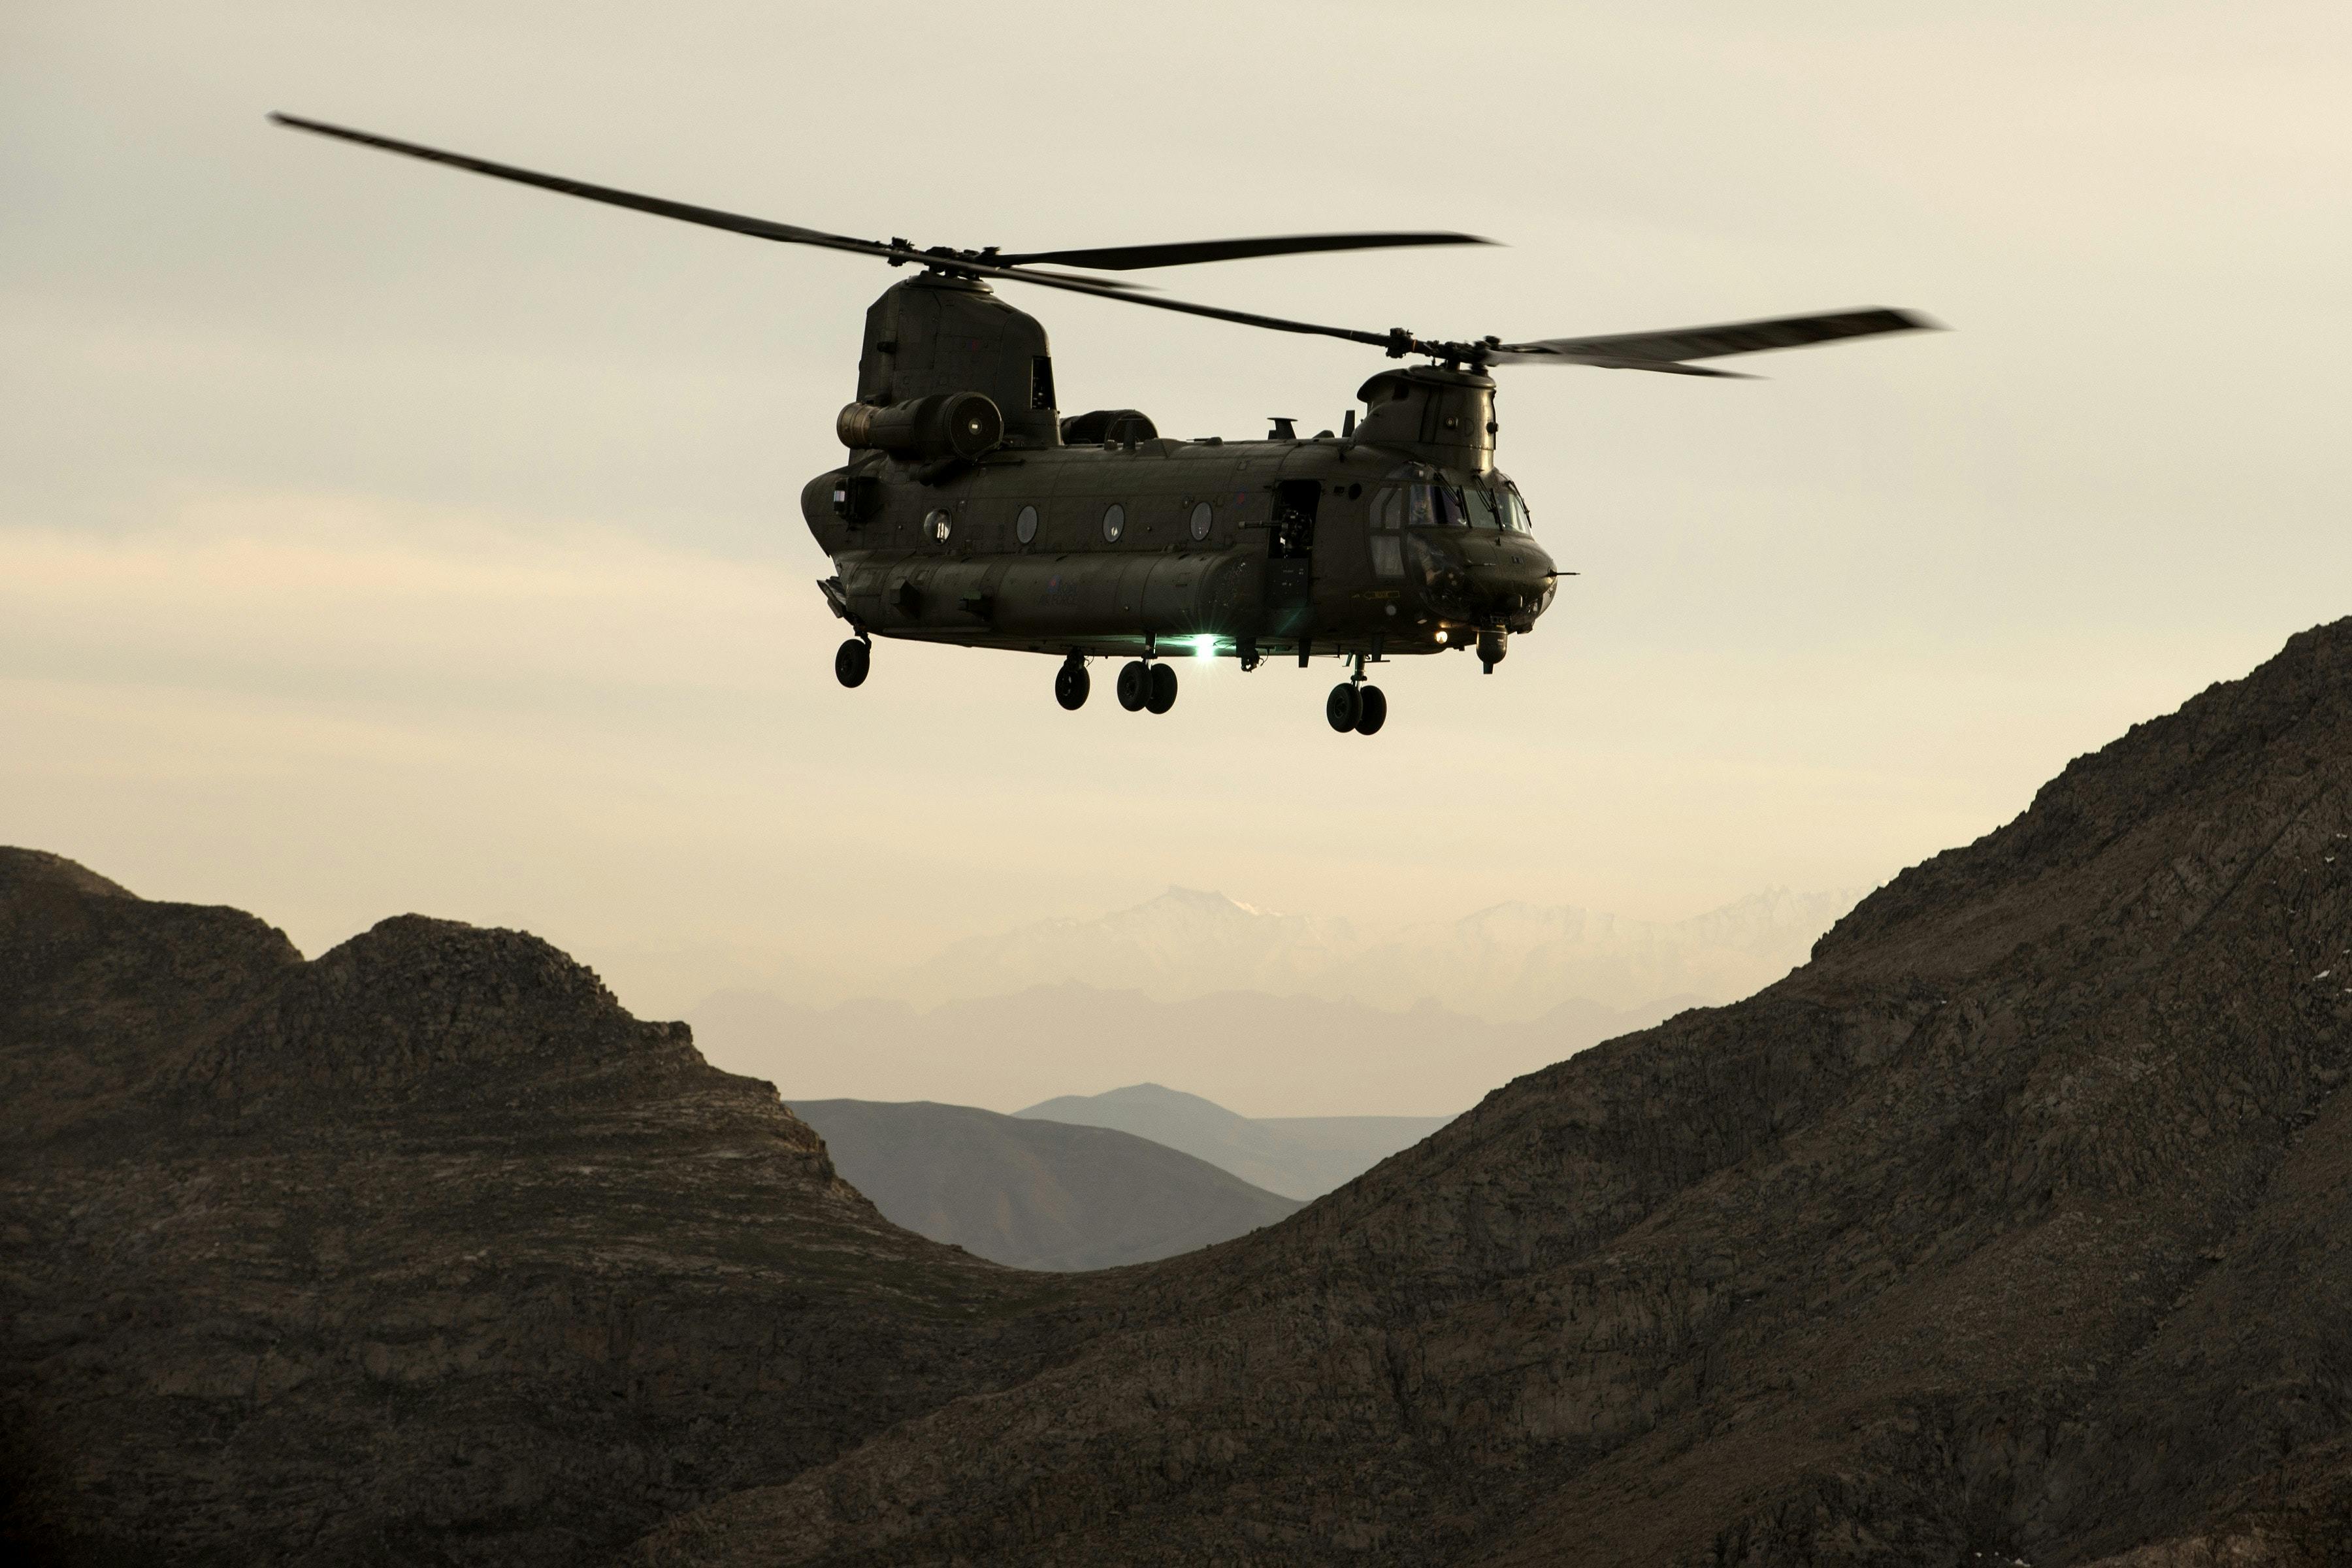 An RAF Chinook helicopter flying over the mountains of Afghanistan. Synonymous with operations in Afghanistan over the last thirteen years, the Chinook Force flew over 41,000 hours, extracted 13,000 casualties and its crews have been awarded numerous gallantry awards, including twenty three distinguished flying crosses for bravery in the air.